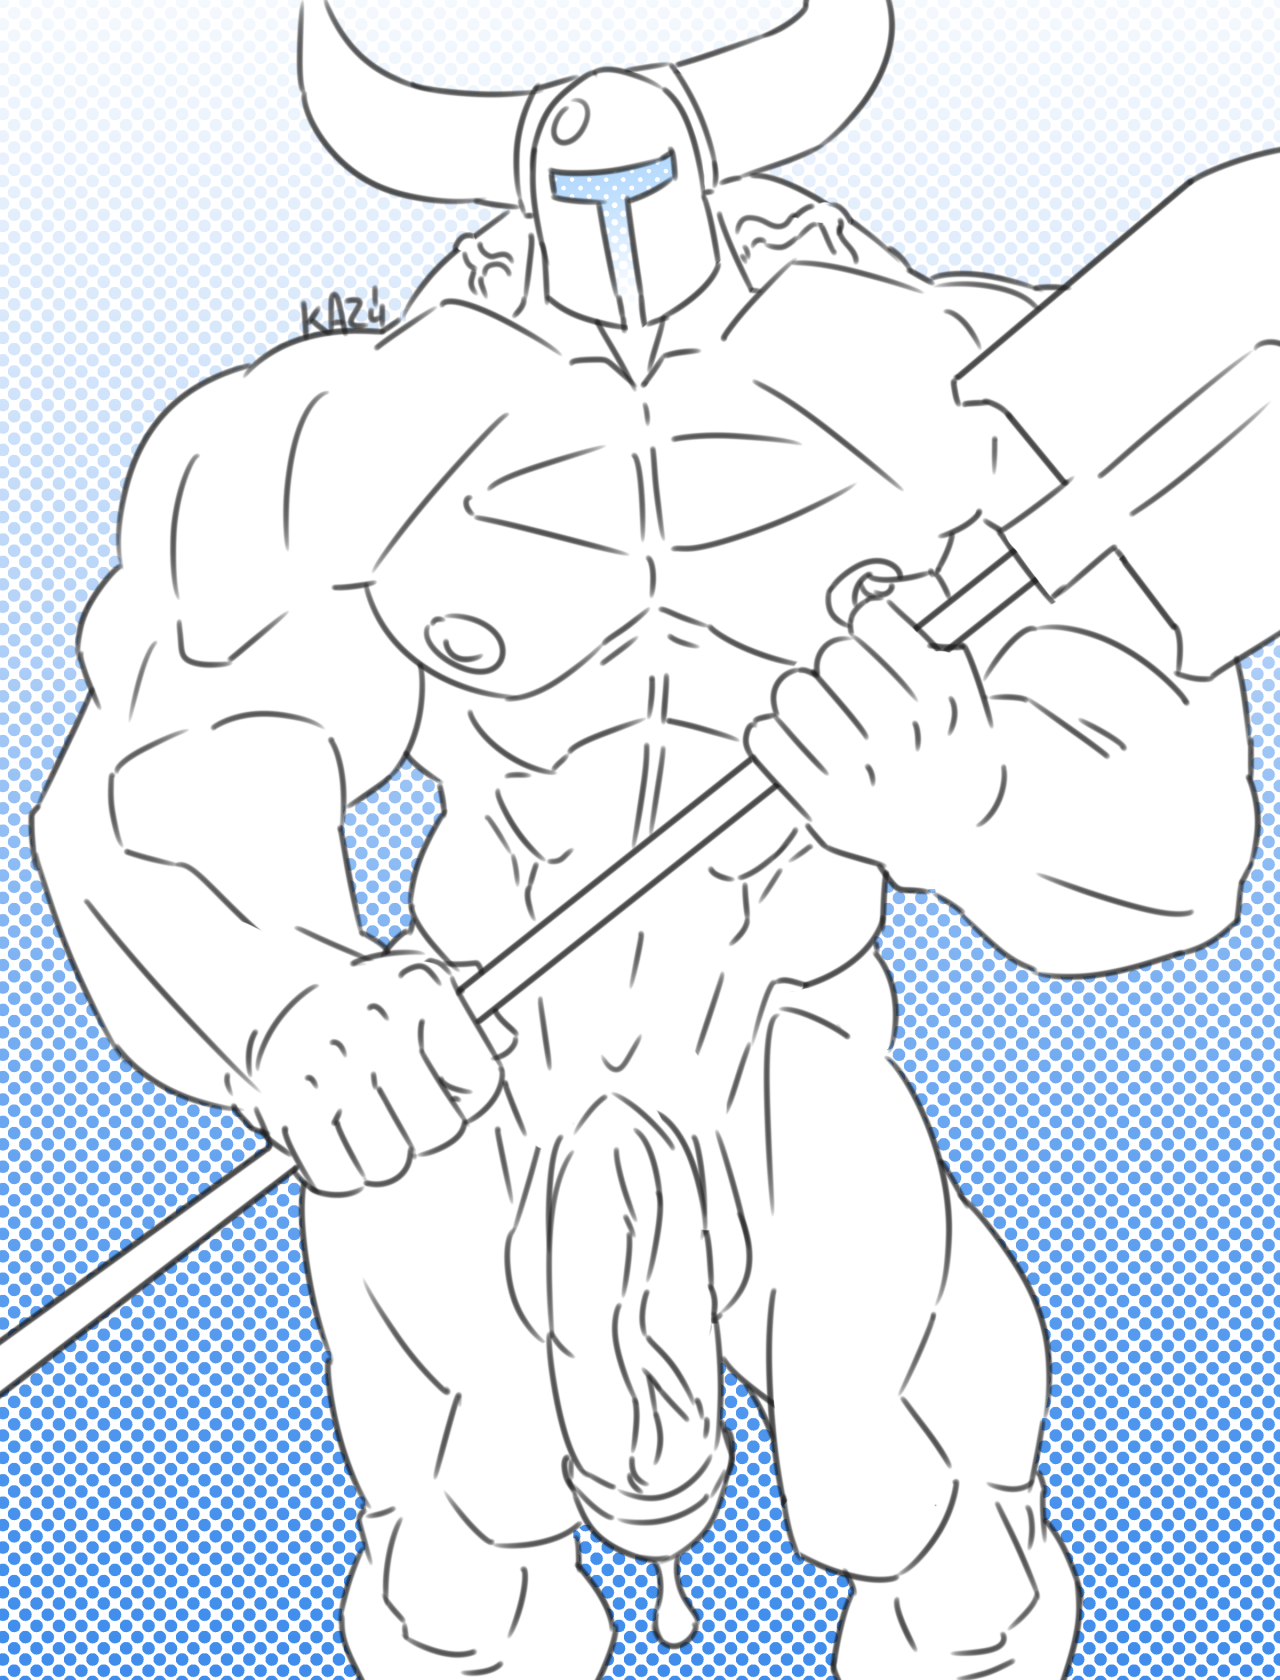 BOWSER'S BEEFY BOD â€” a shovel knight pic i commissioned from...